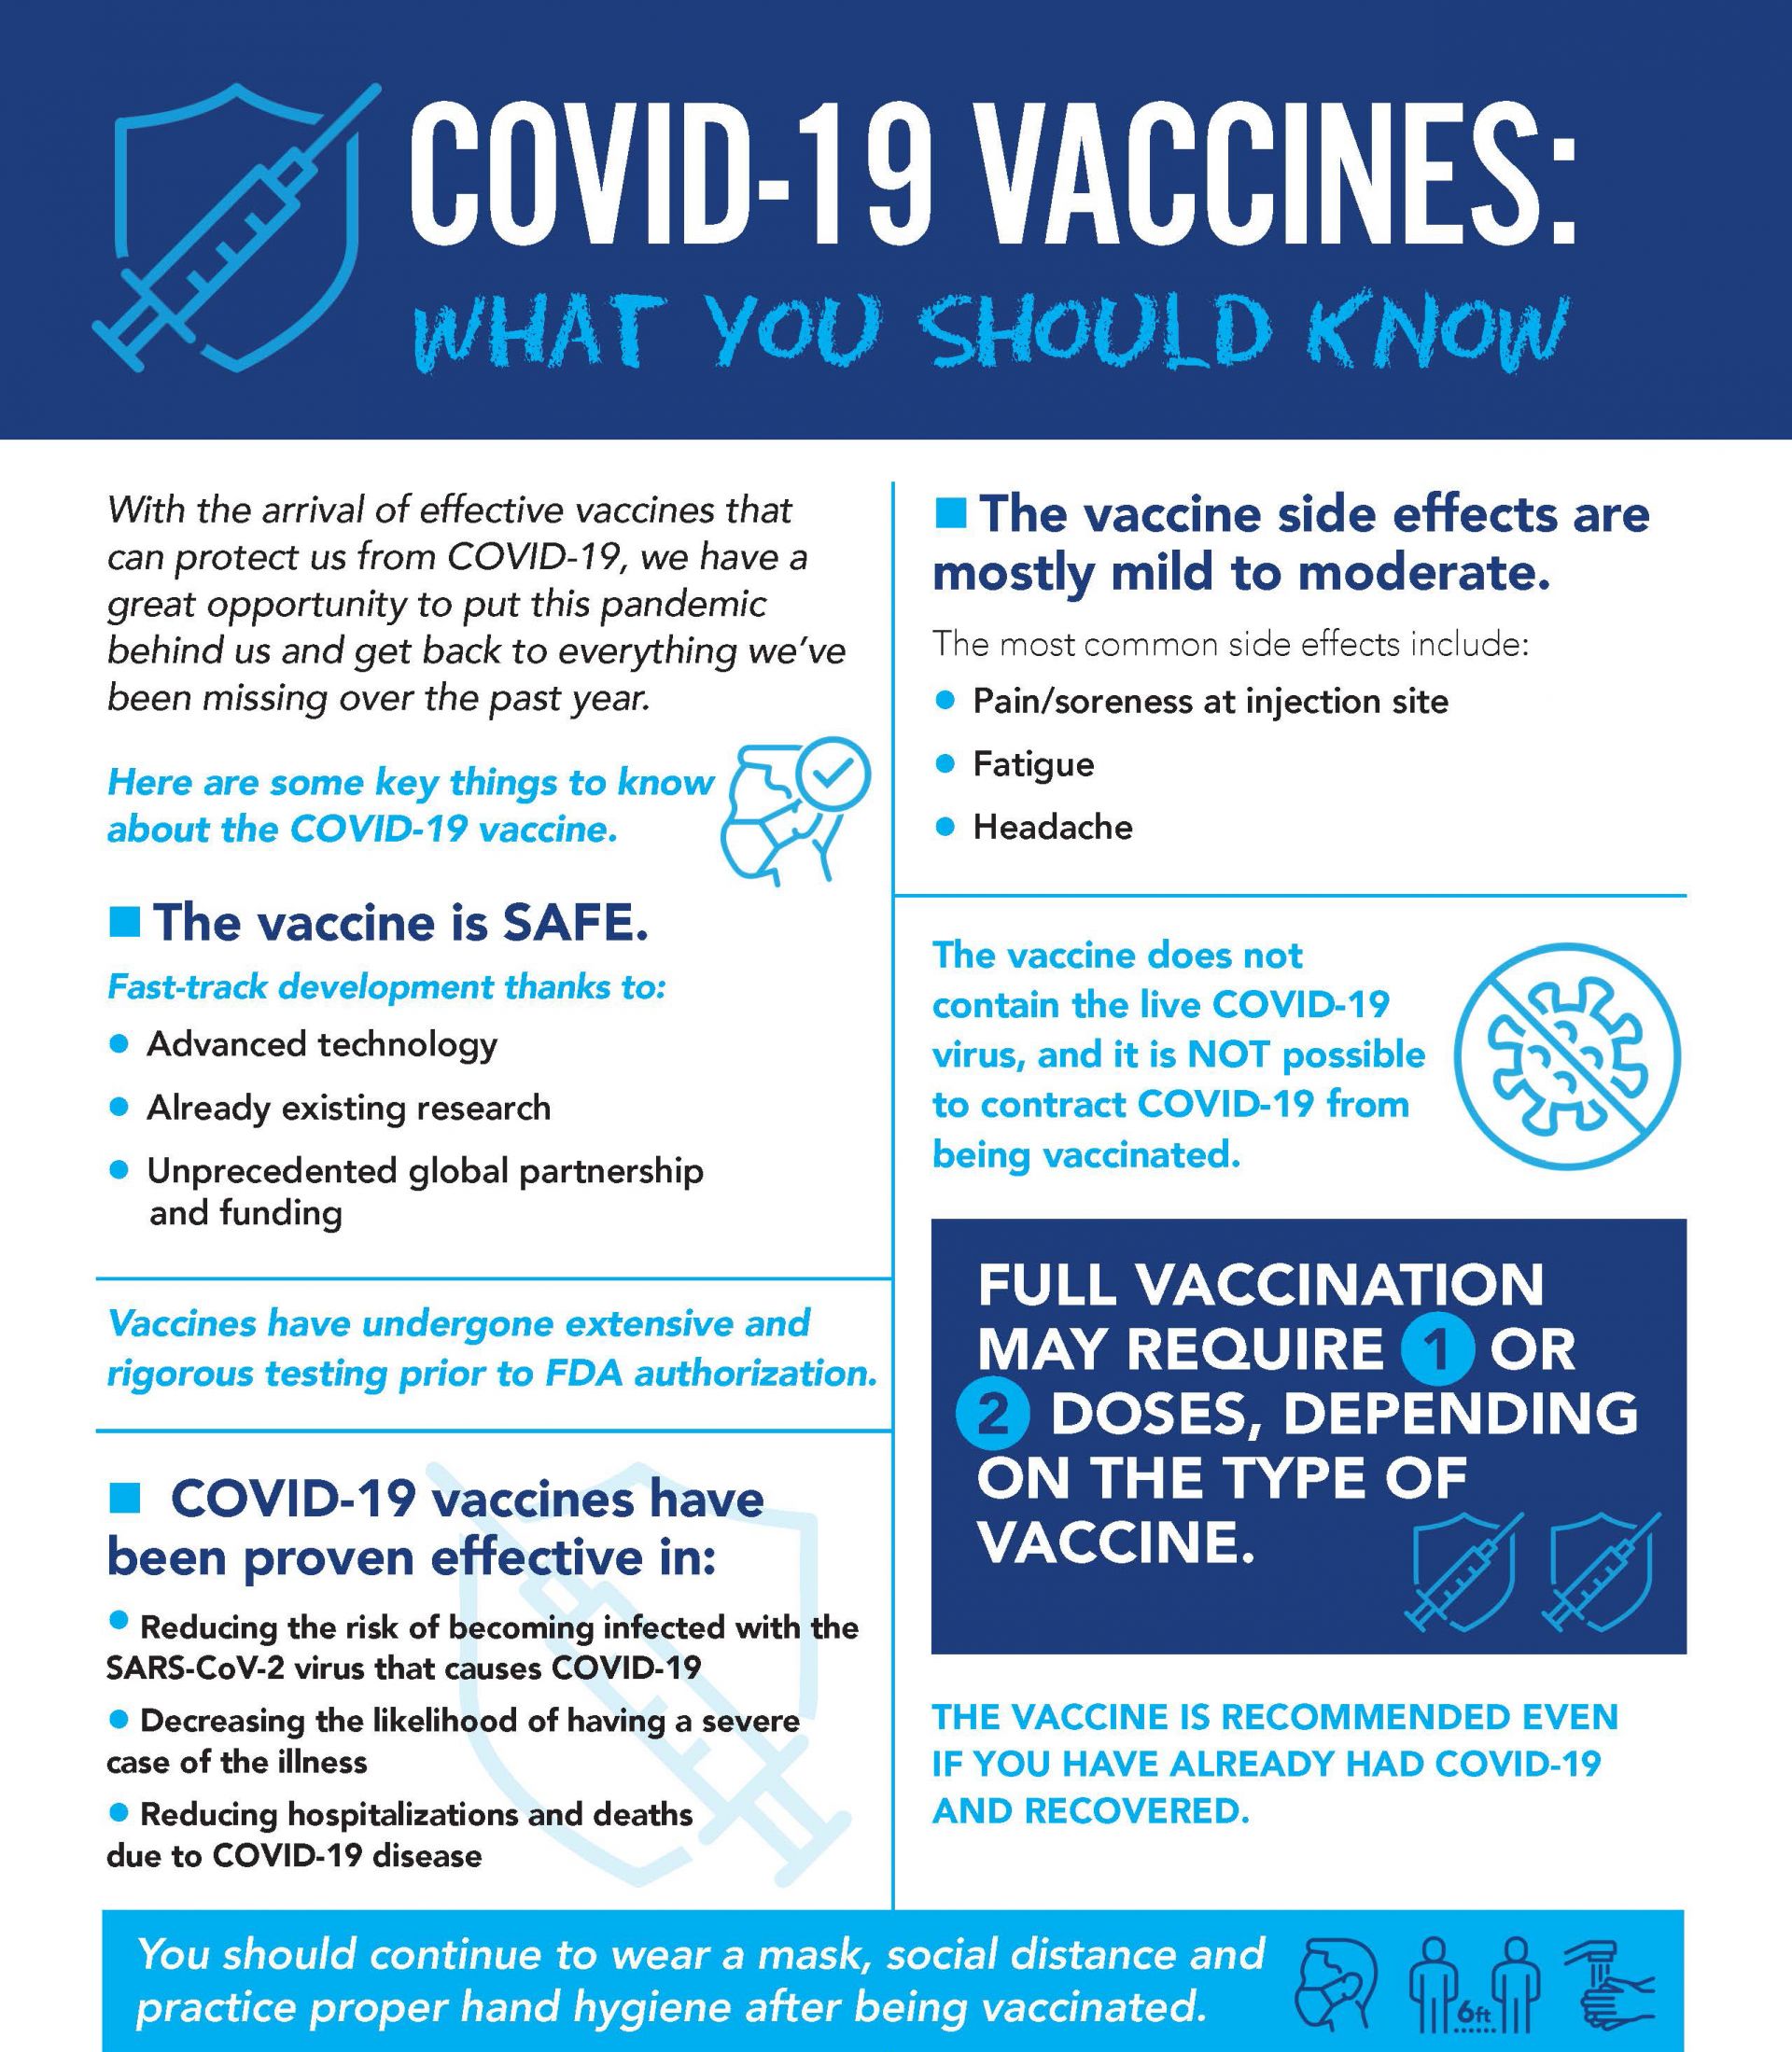 How to Set Up an Efficient Covid-19 Vaccination Site